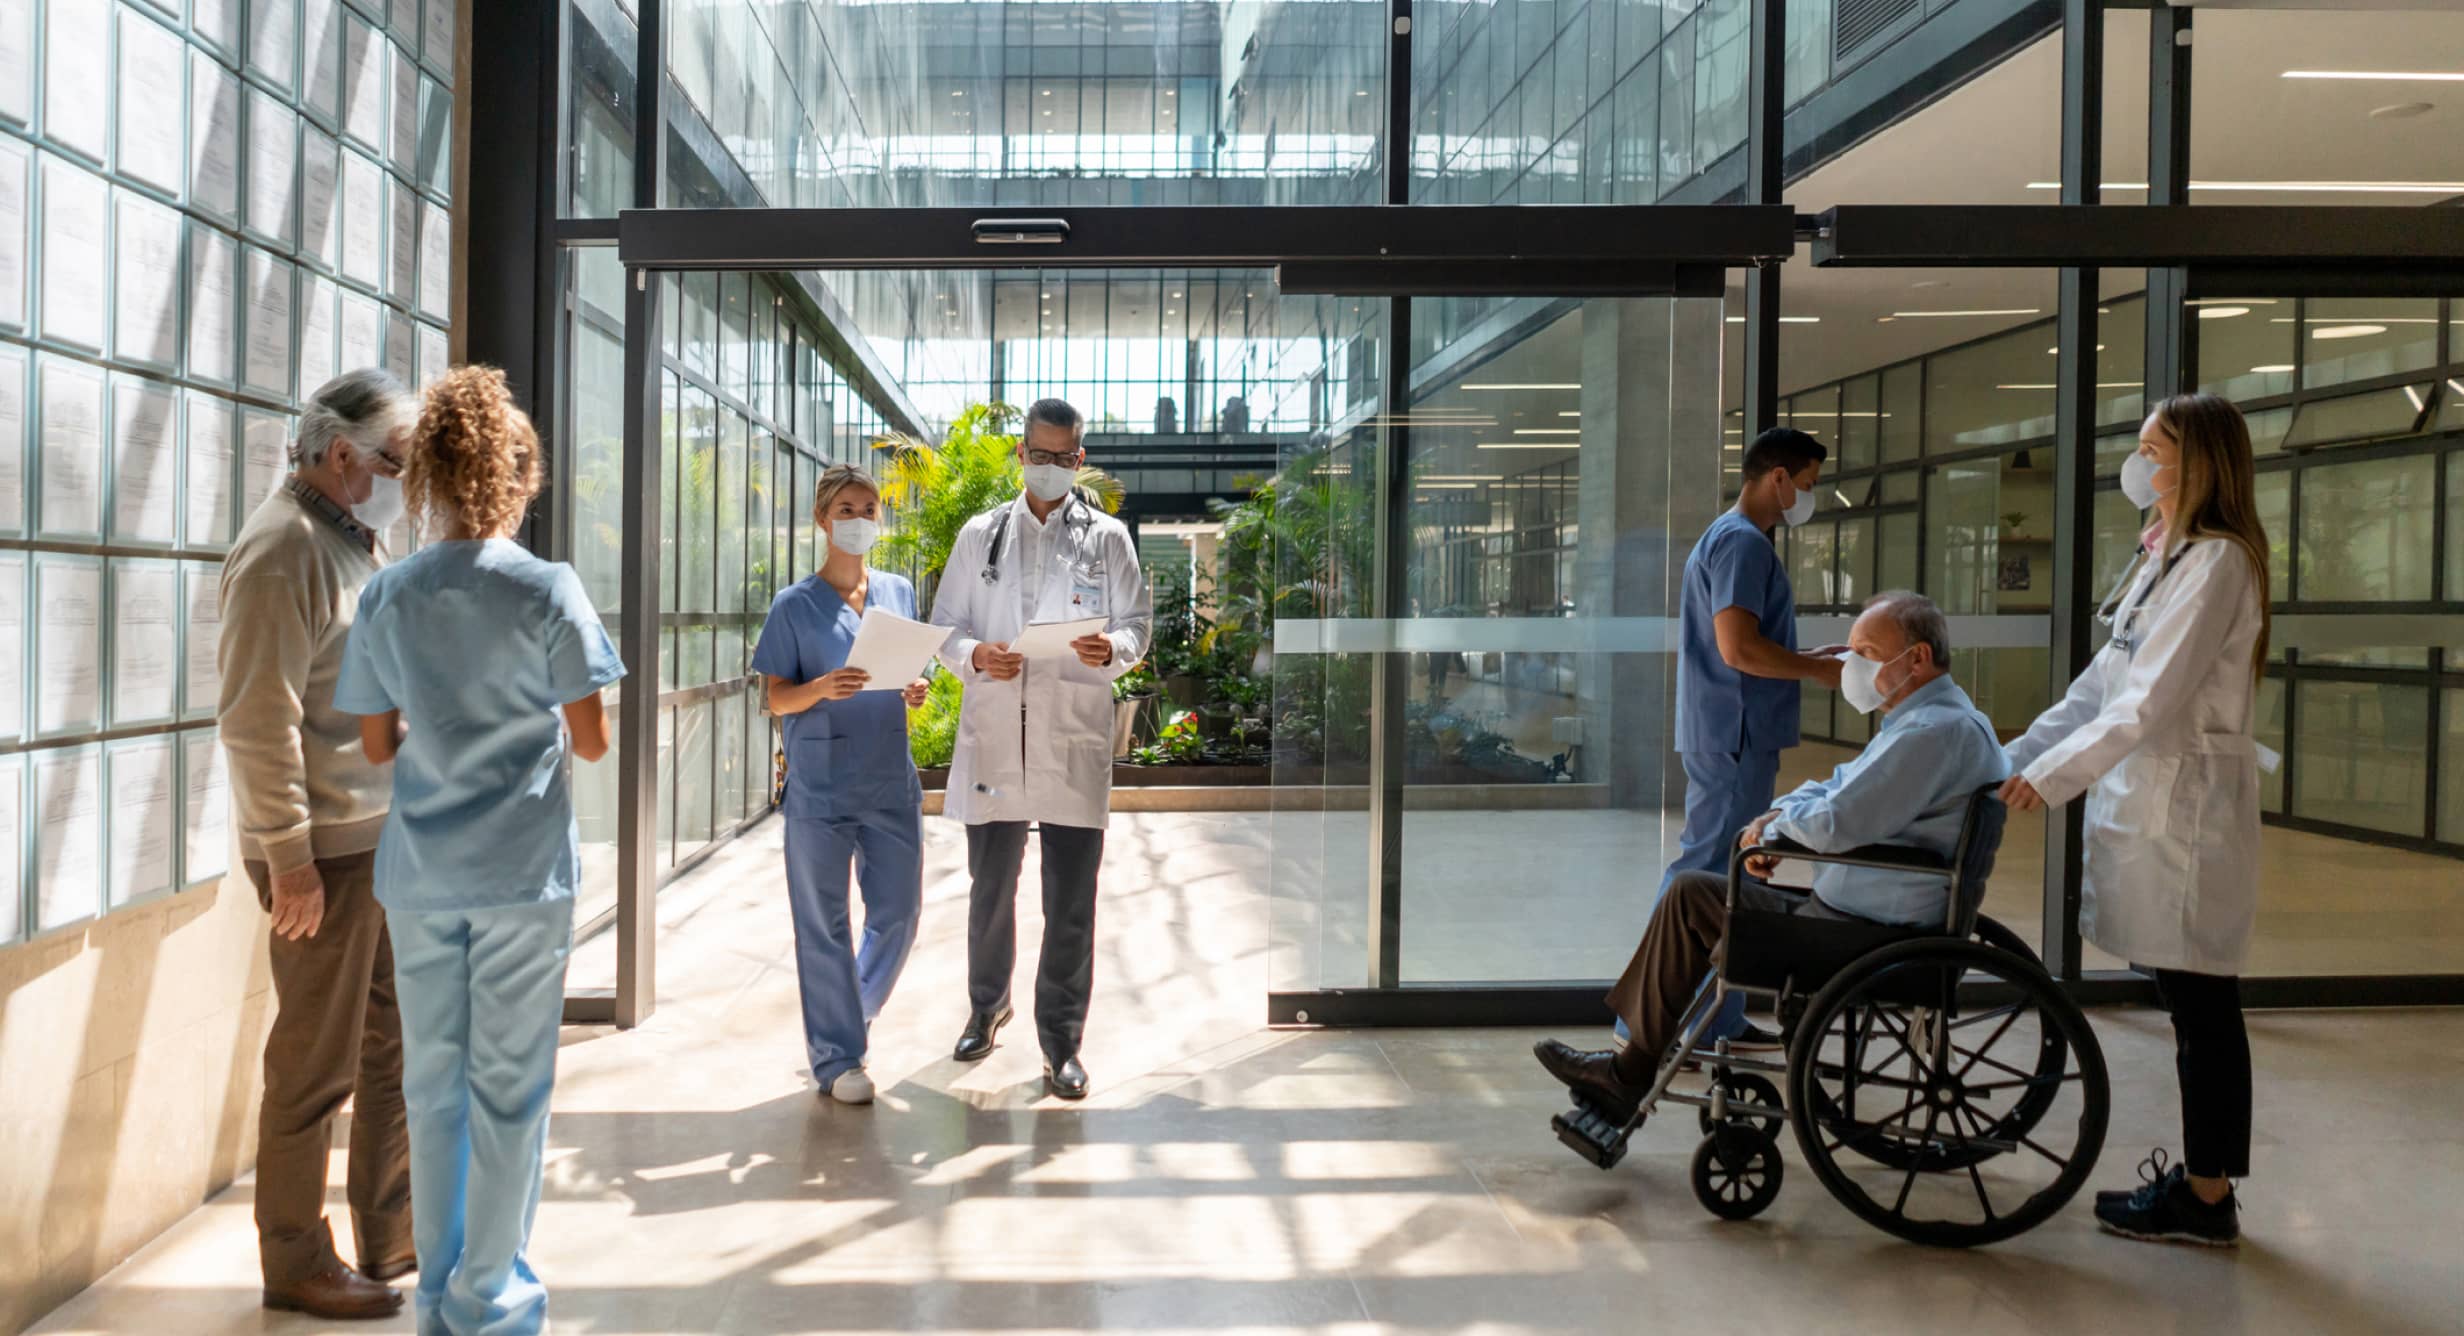 The Pandemic Resilient Hospital: How Design Can Help Facilities Stay Operational and Safe